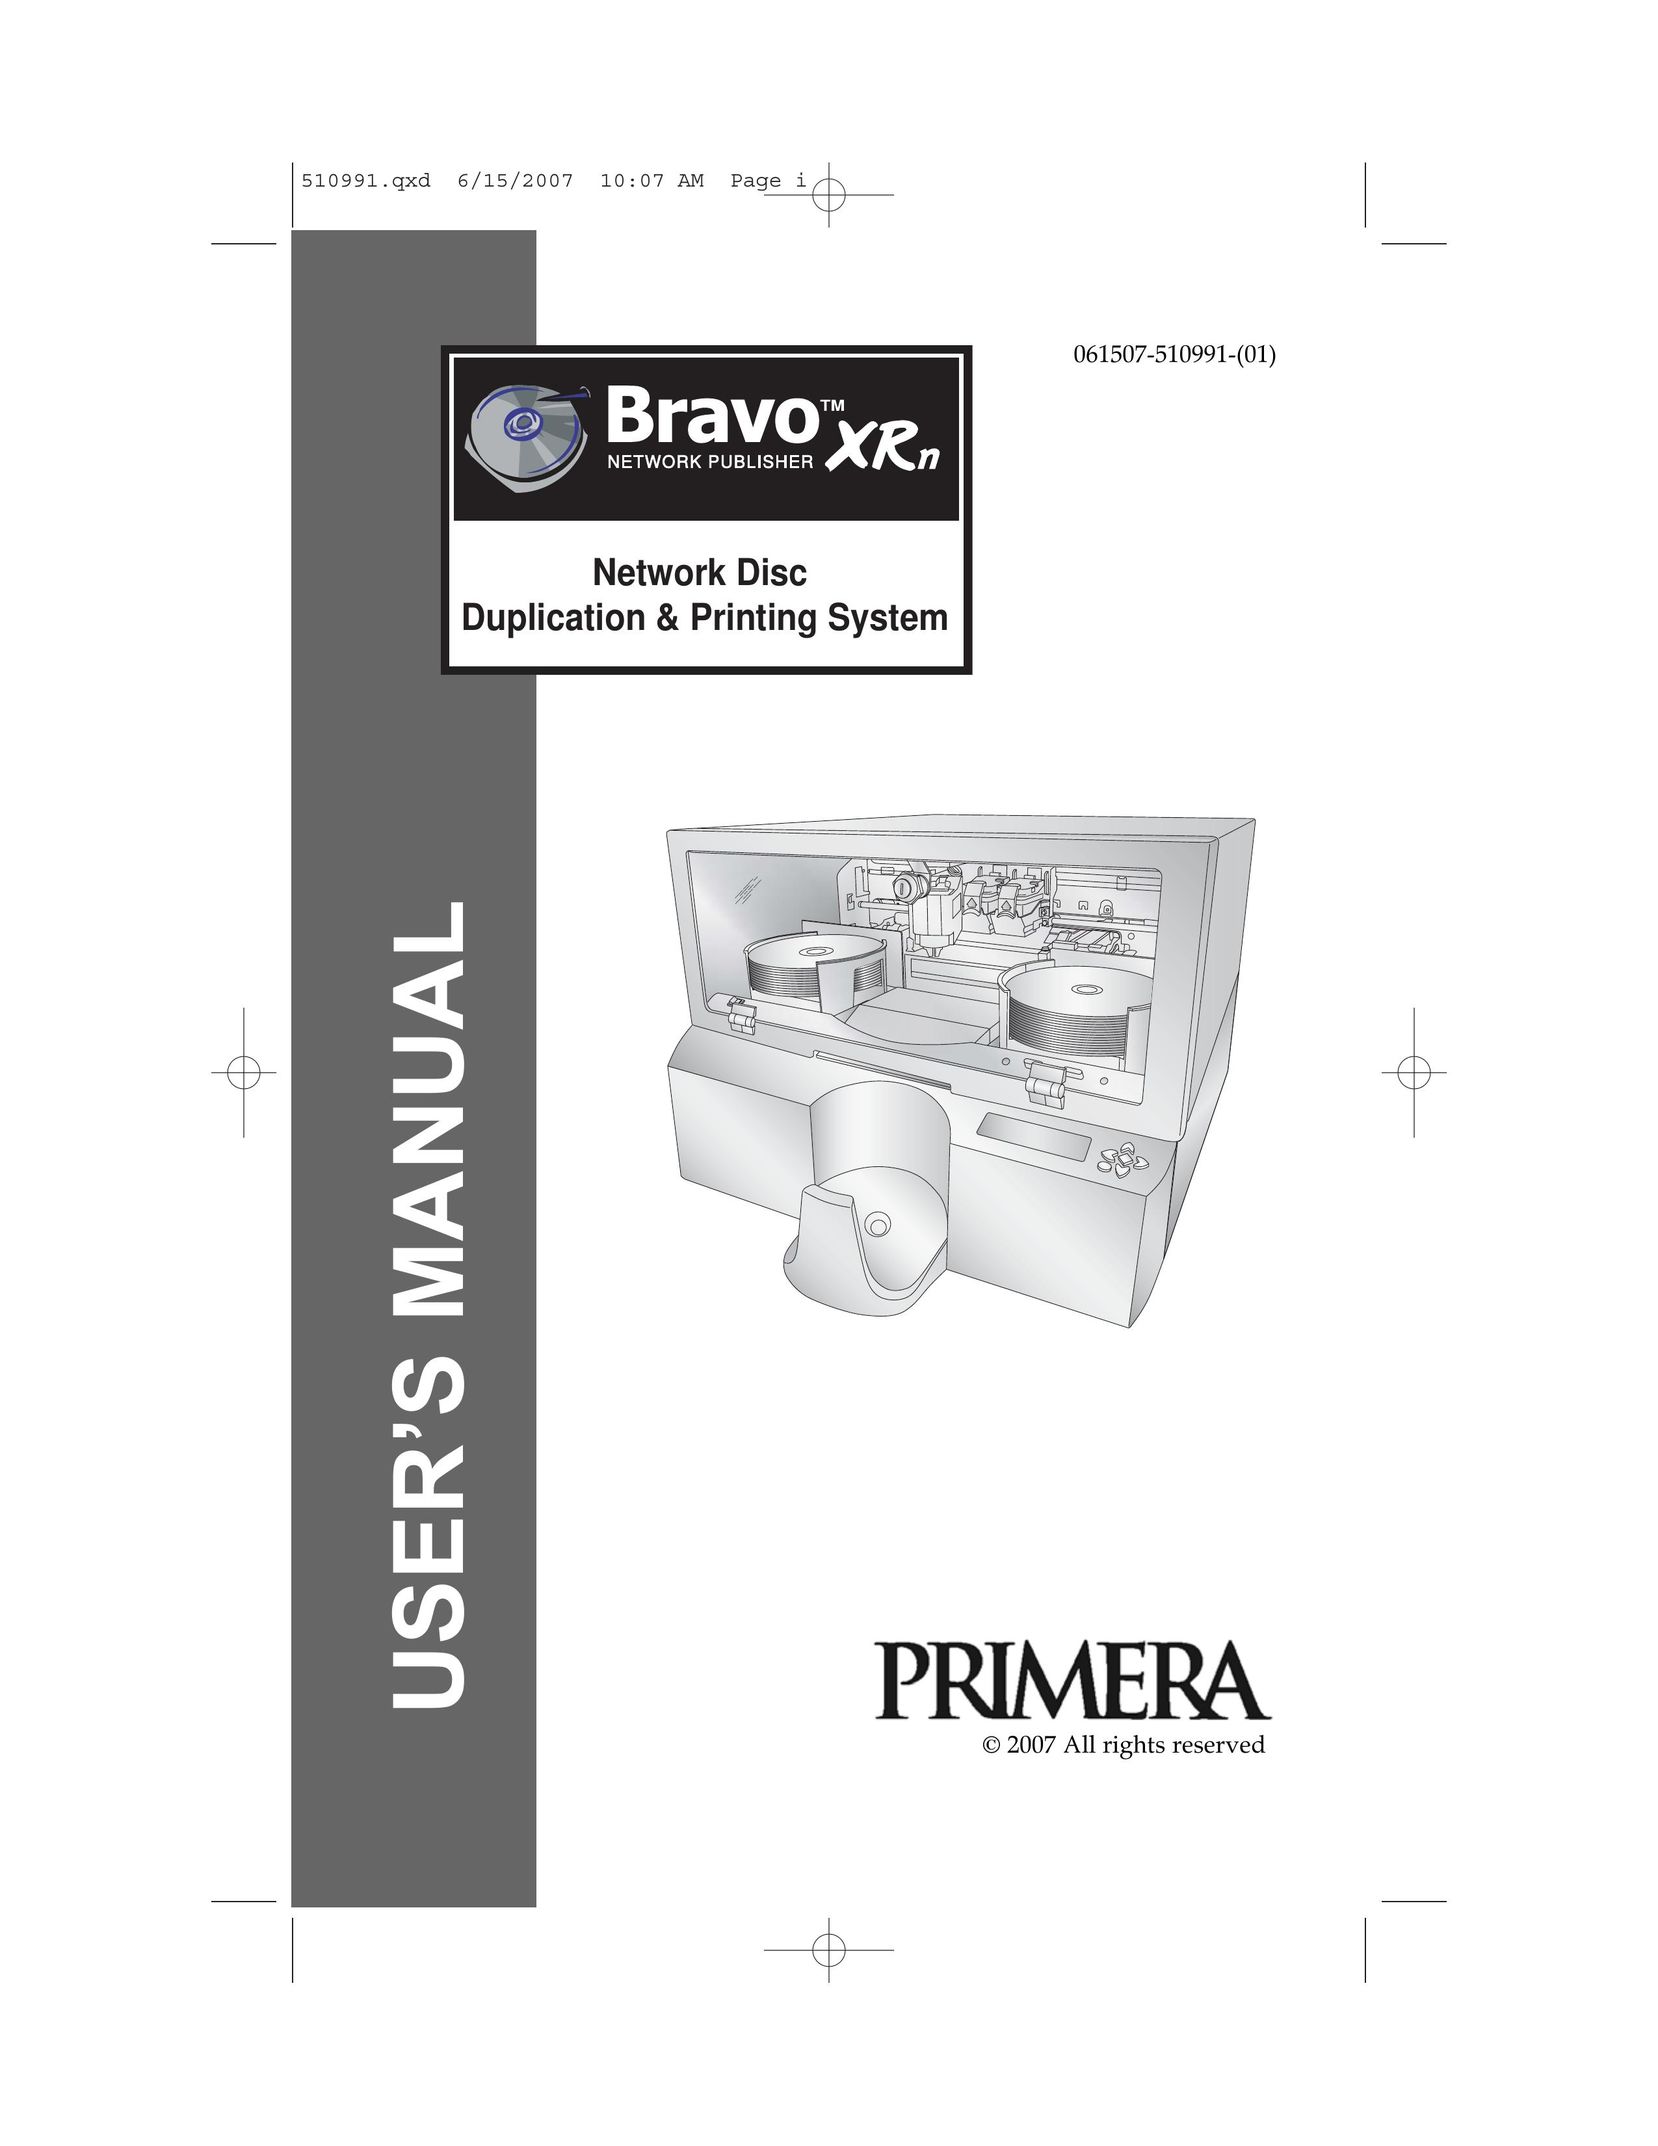 Primera Technology Network Disc Duplication & Printing System All in One Printer User Manual